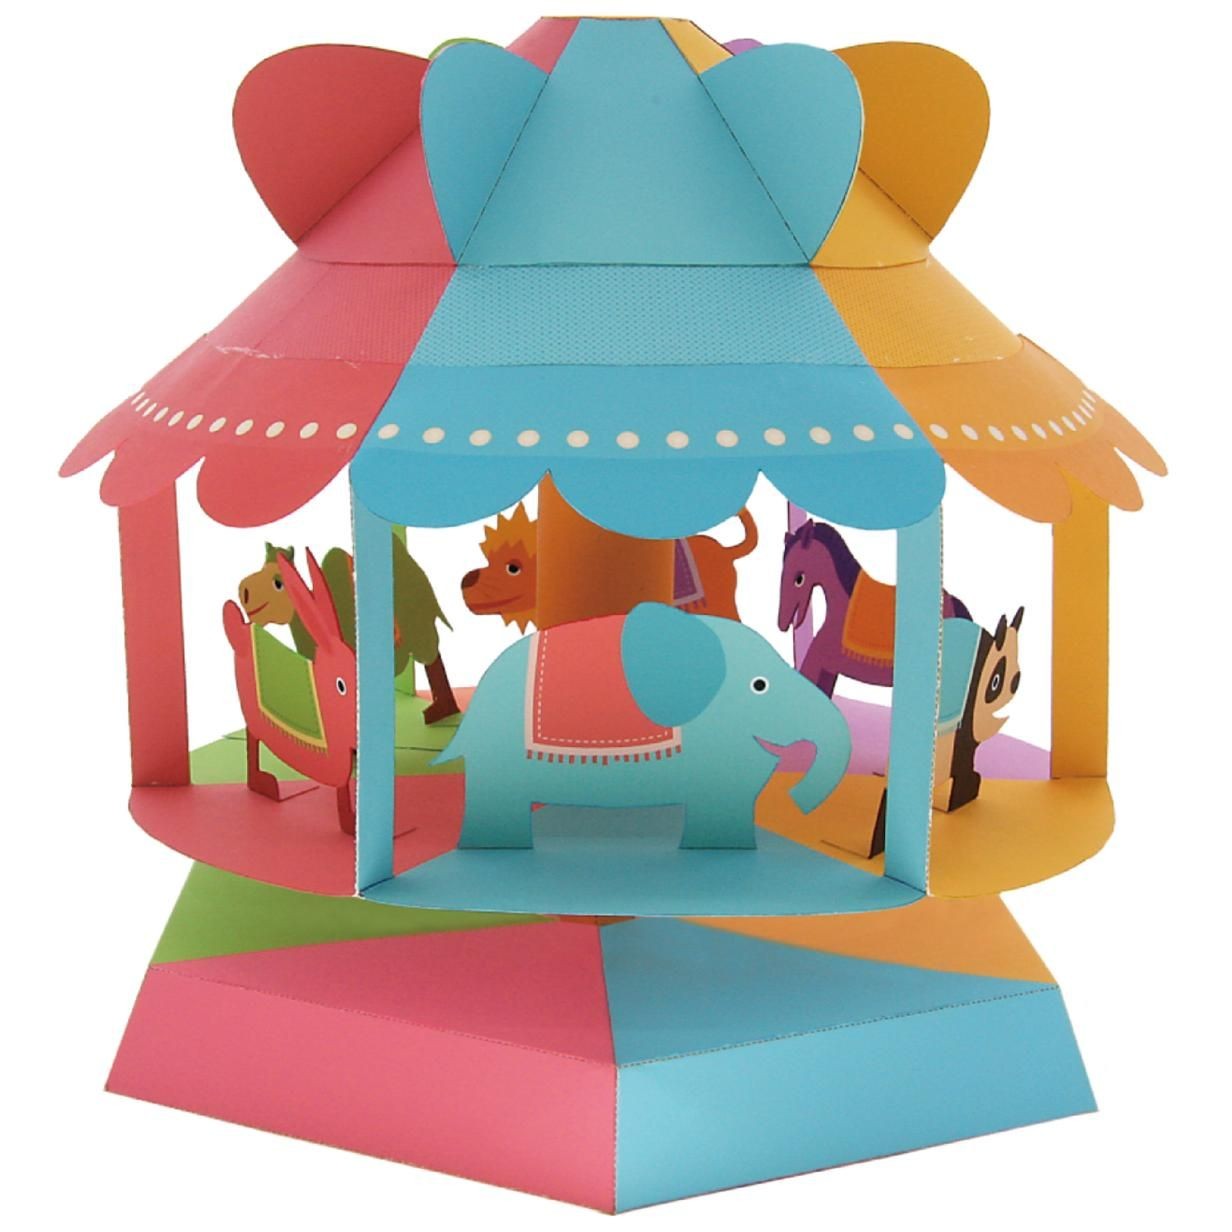 Lion Papercraft Wind Powered Merry Go Round toys Paper Craft Educational Rabbit